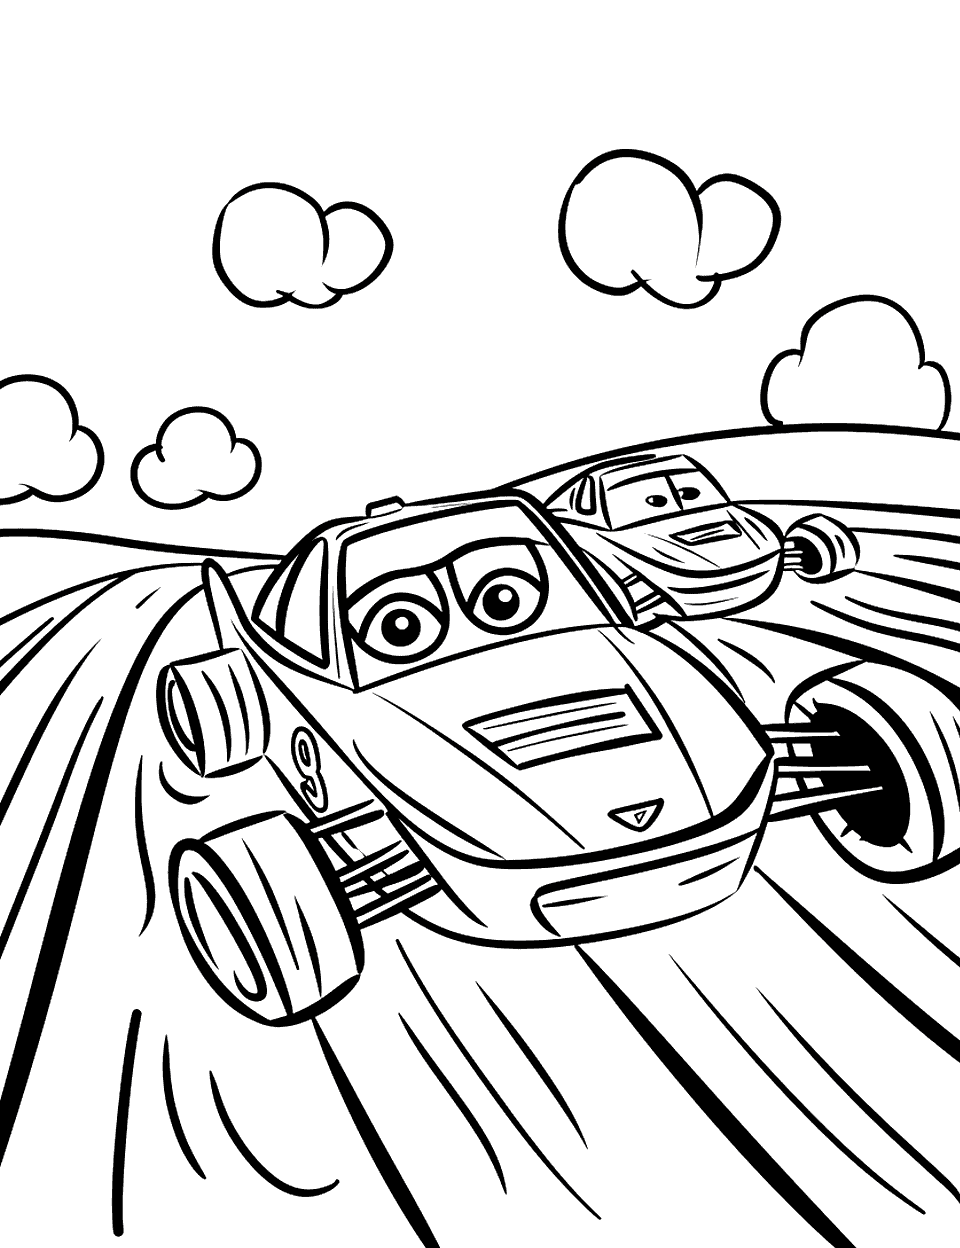 Rectangle Race Cars Shapes Coloring Page - Sleek race cars with rectangular bodies speeding down a simple, straight track.